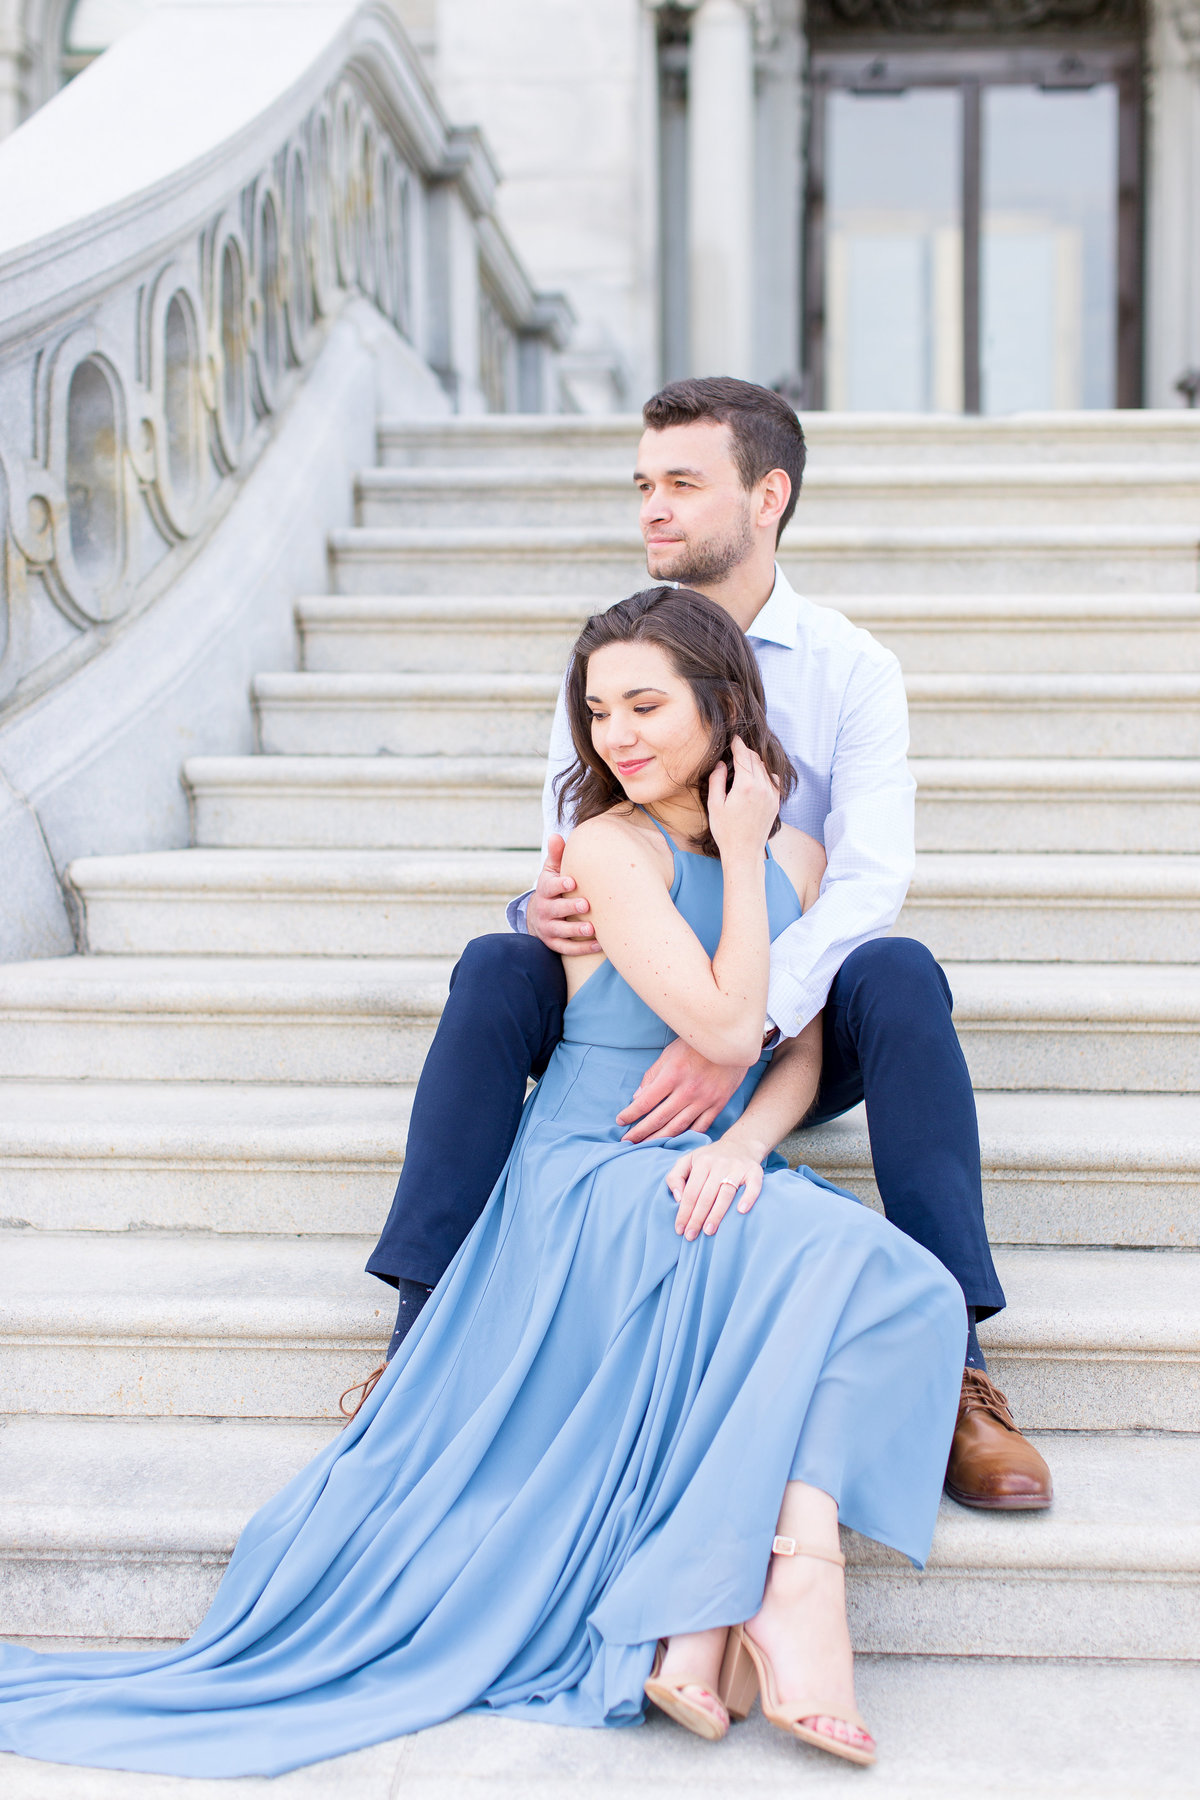 Deanna & Grant | Capital Building Engagement Session | DC Wedding Photographer | Taylor Rose Photography-97